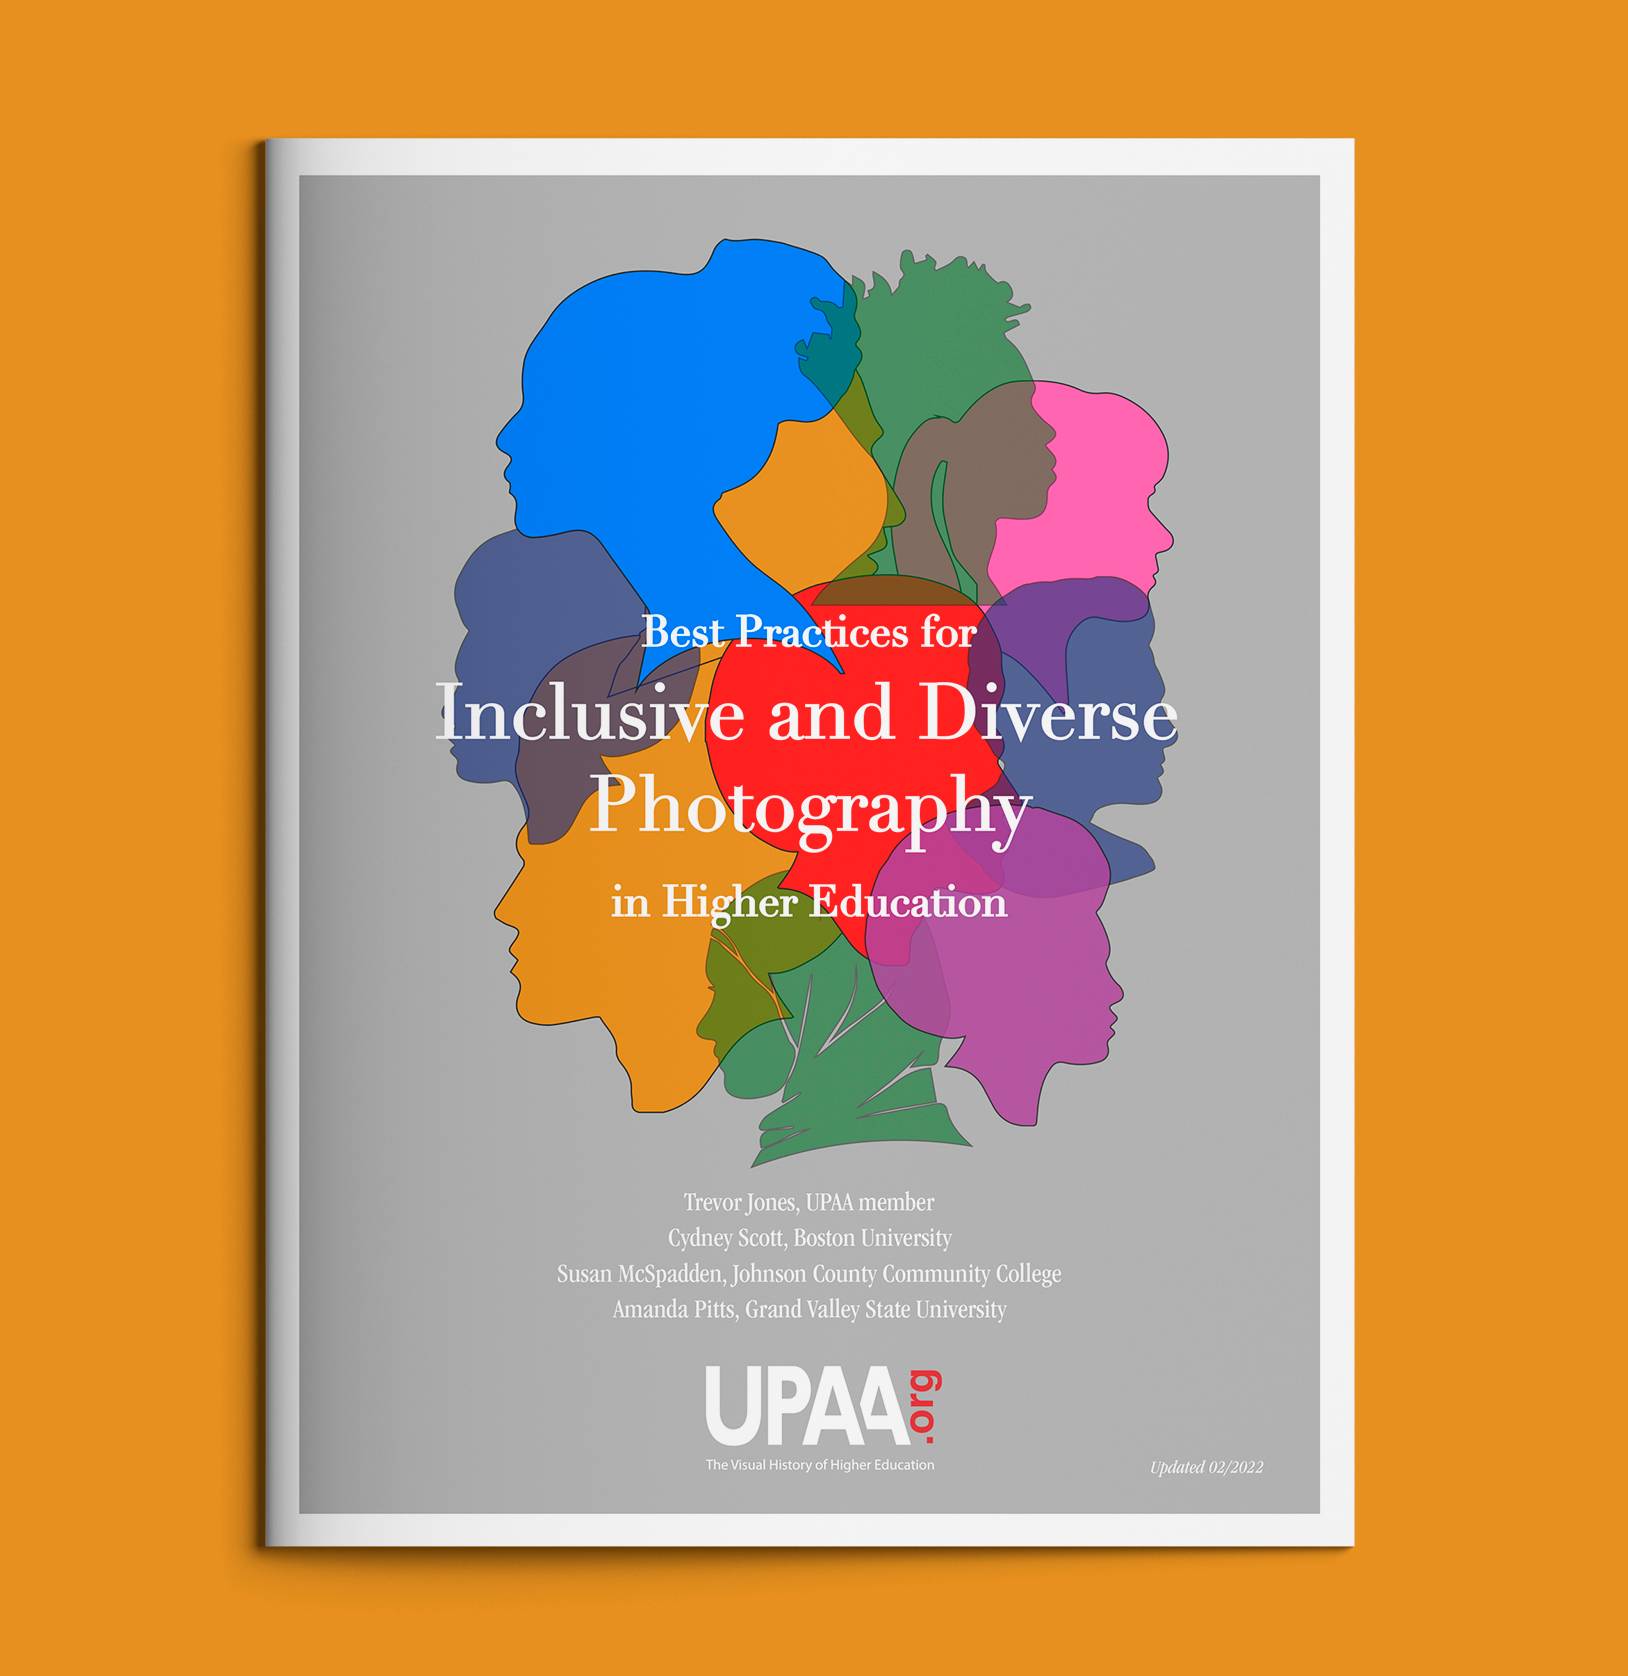 Cover of booklet titled "Best Practices for Inclusive and Diverse Photography in Higher Education"